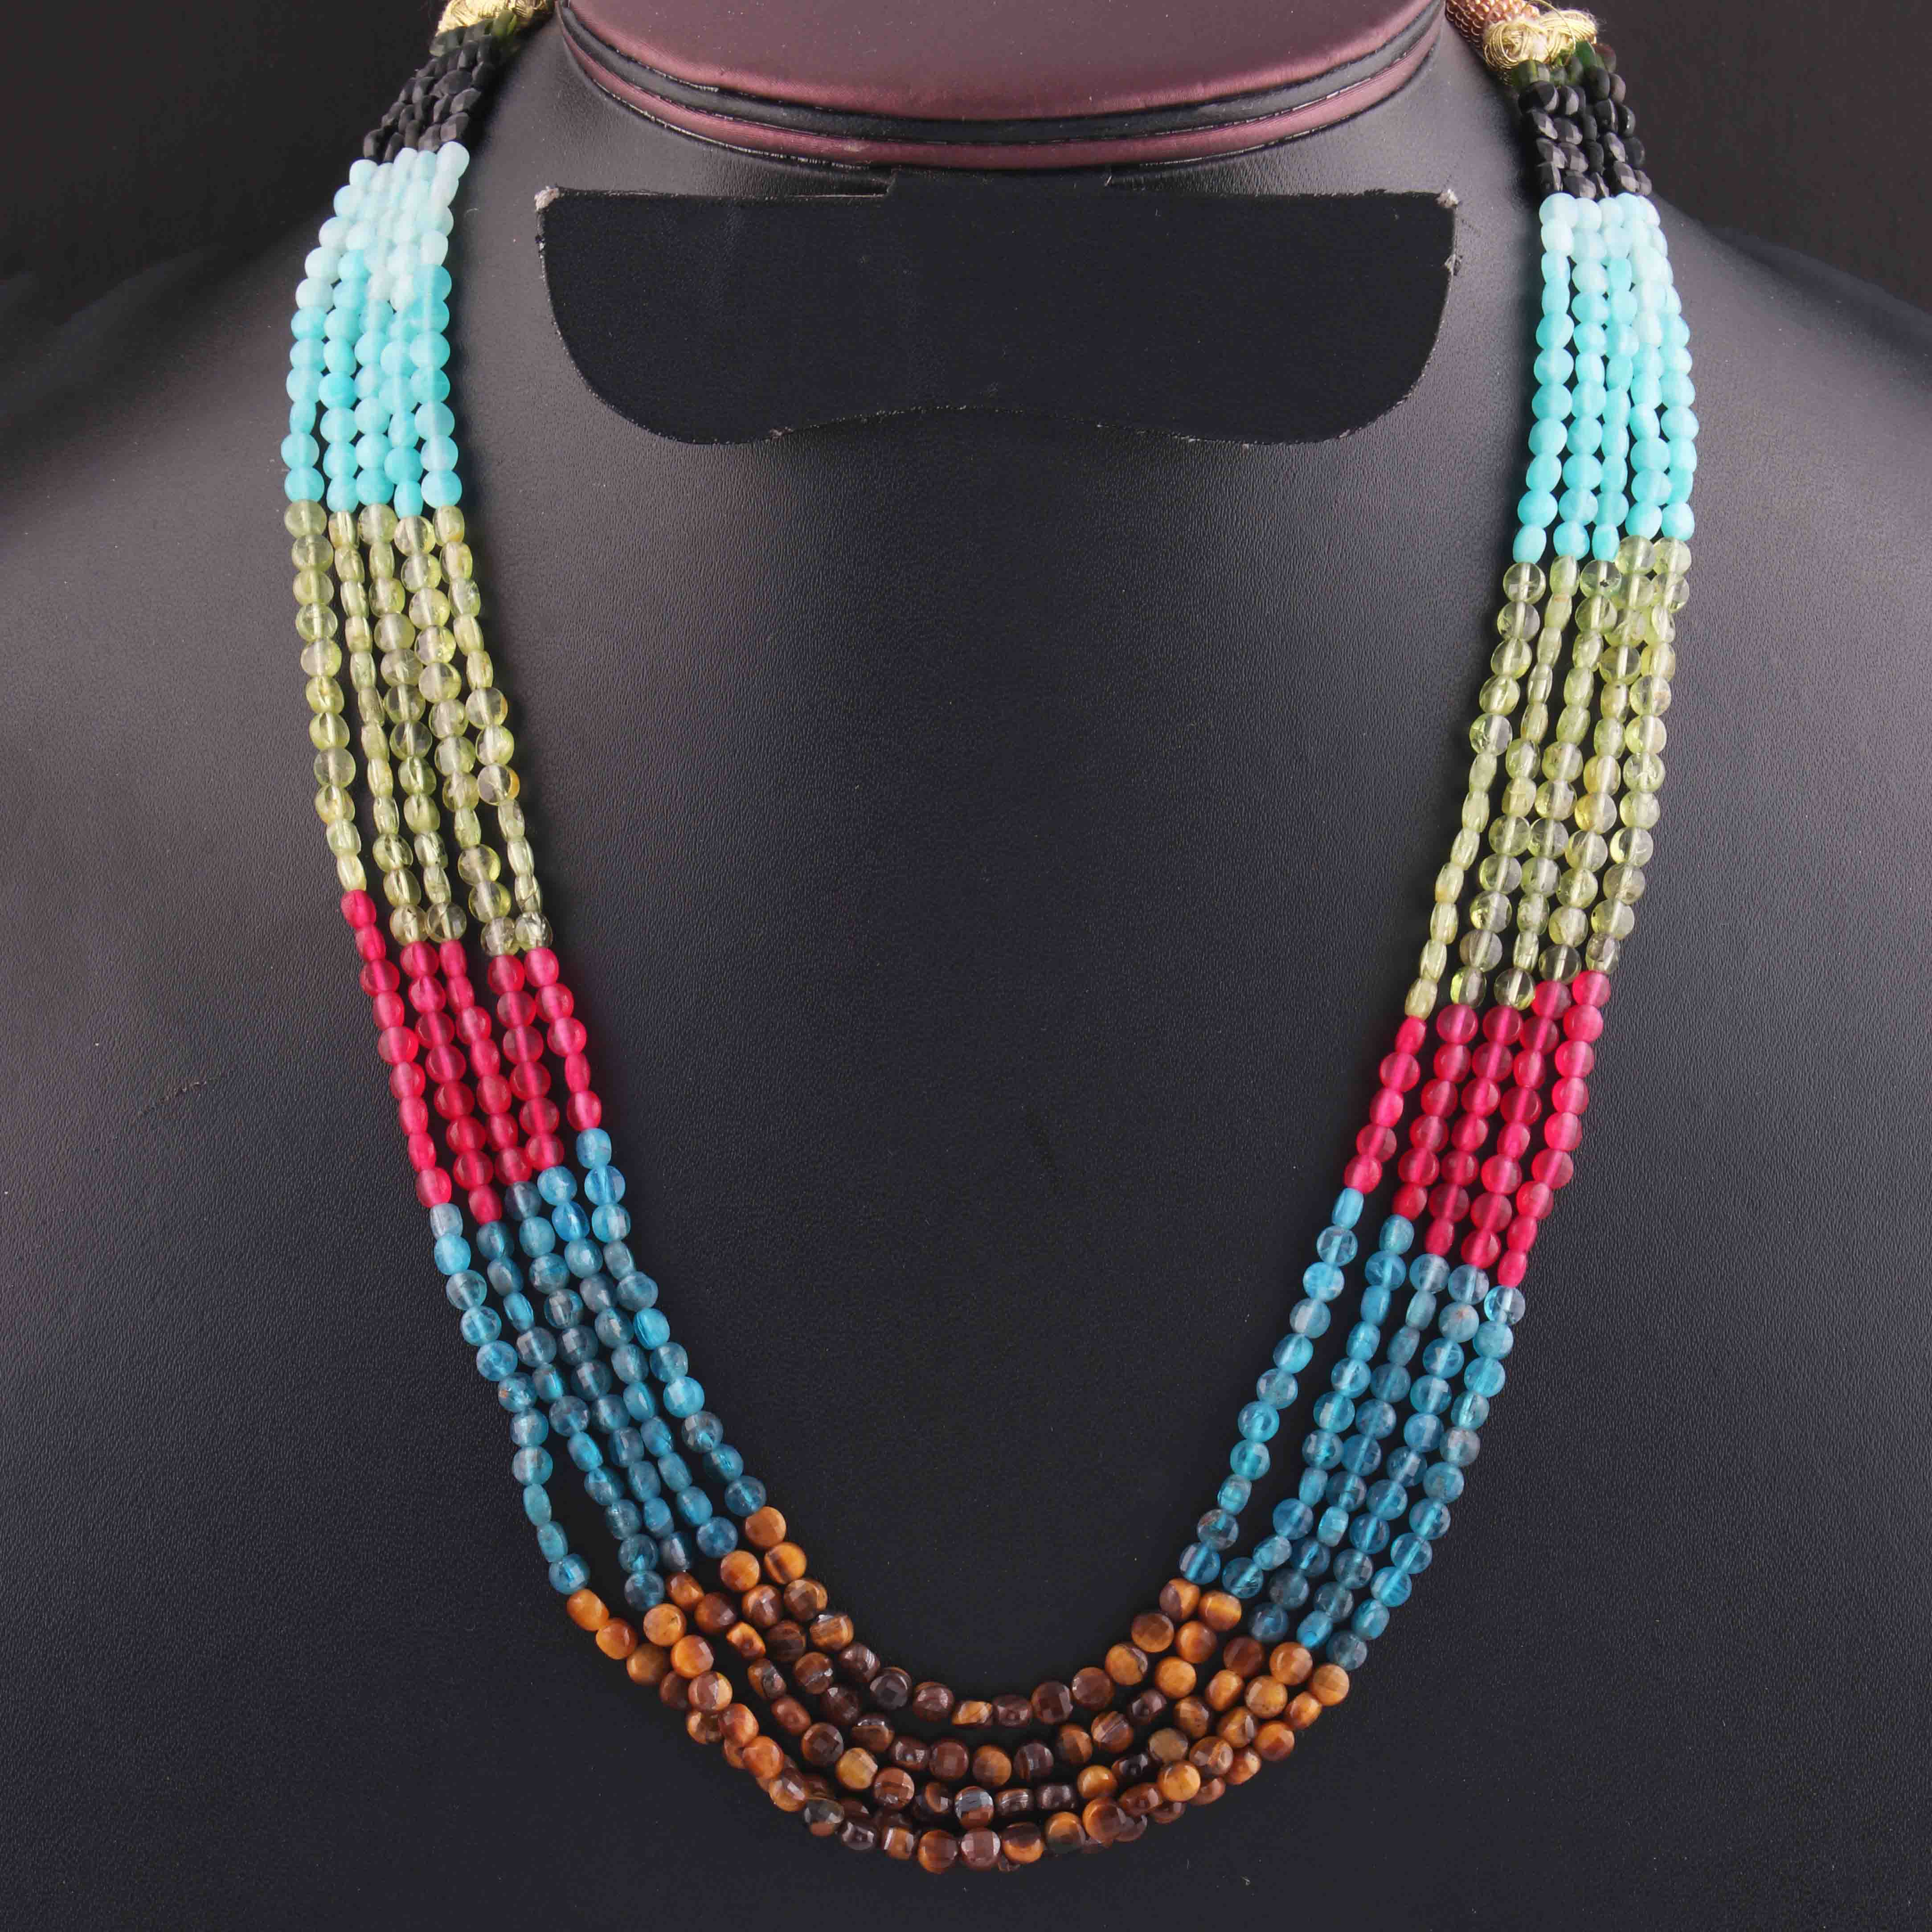 Bohemian Handmade Pearl Choker Necklace With Colourful Beads And Millefiori  Glass Clavicle Chain Elegant Beach Jewelry For Women And Girls From Shemei,  $10.59 | DHgate.Com